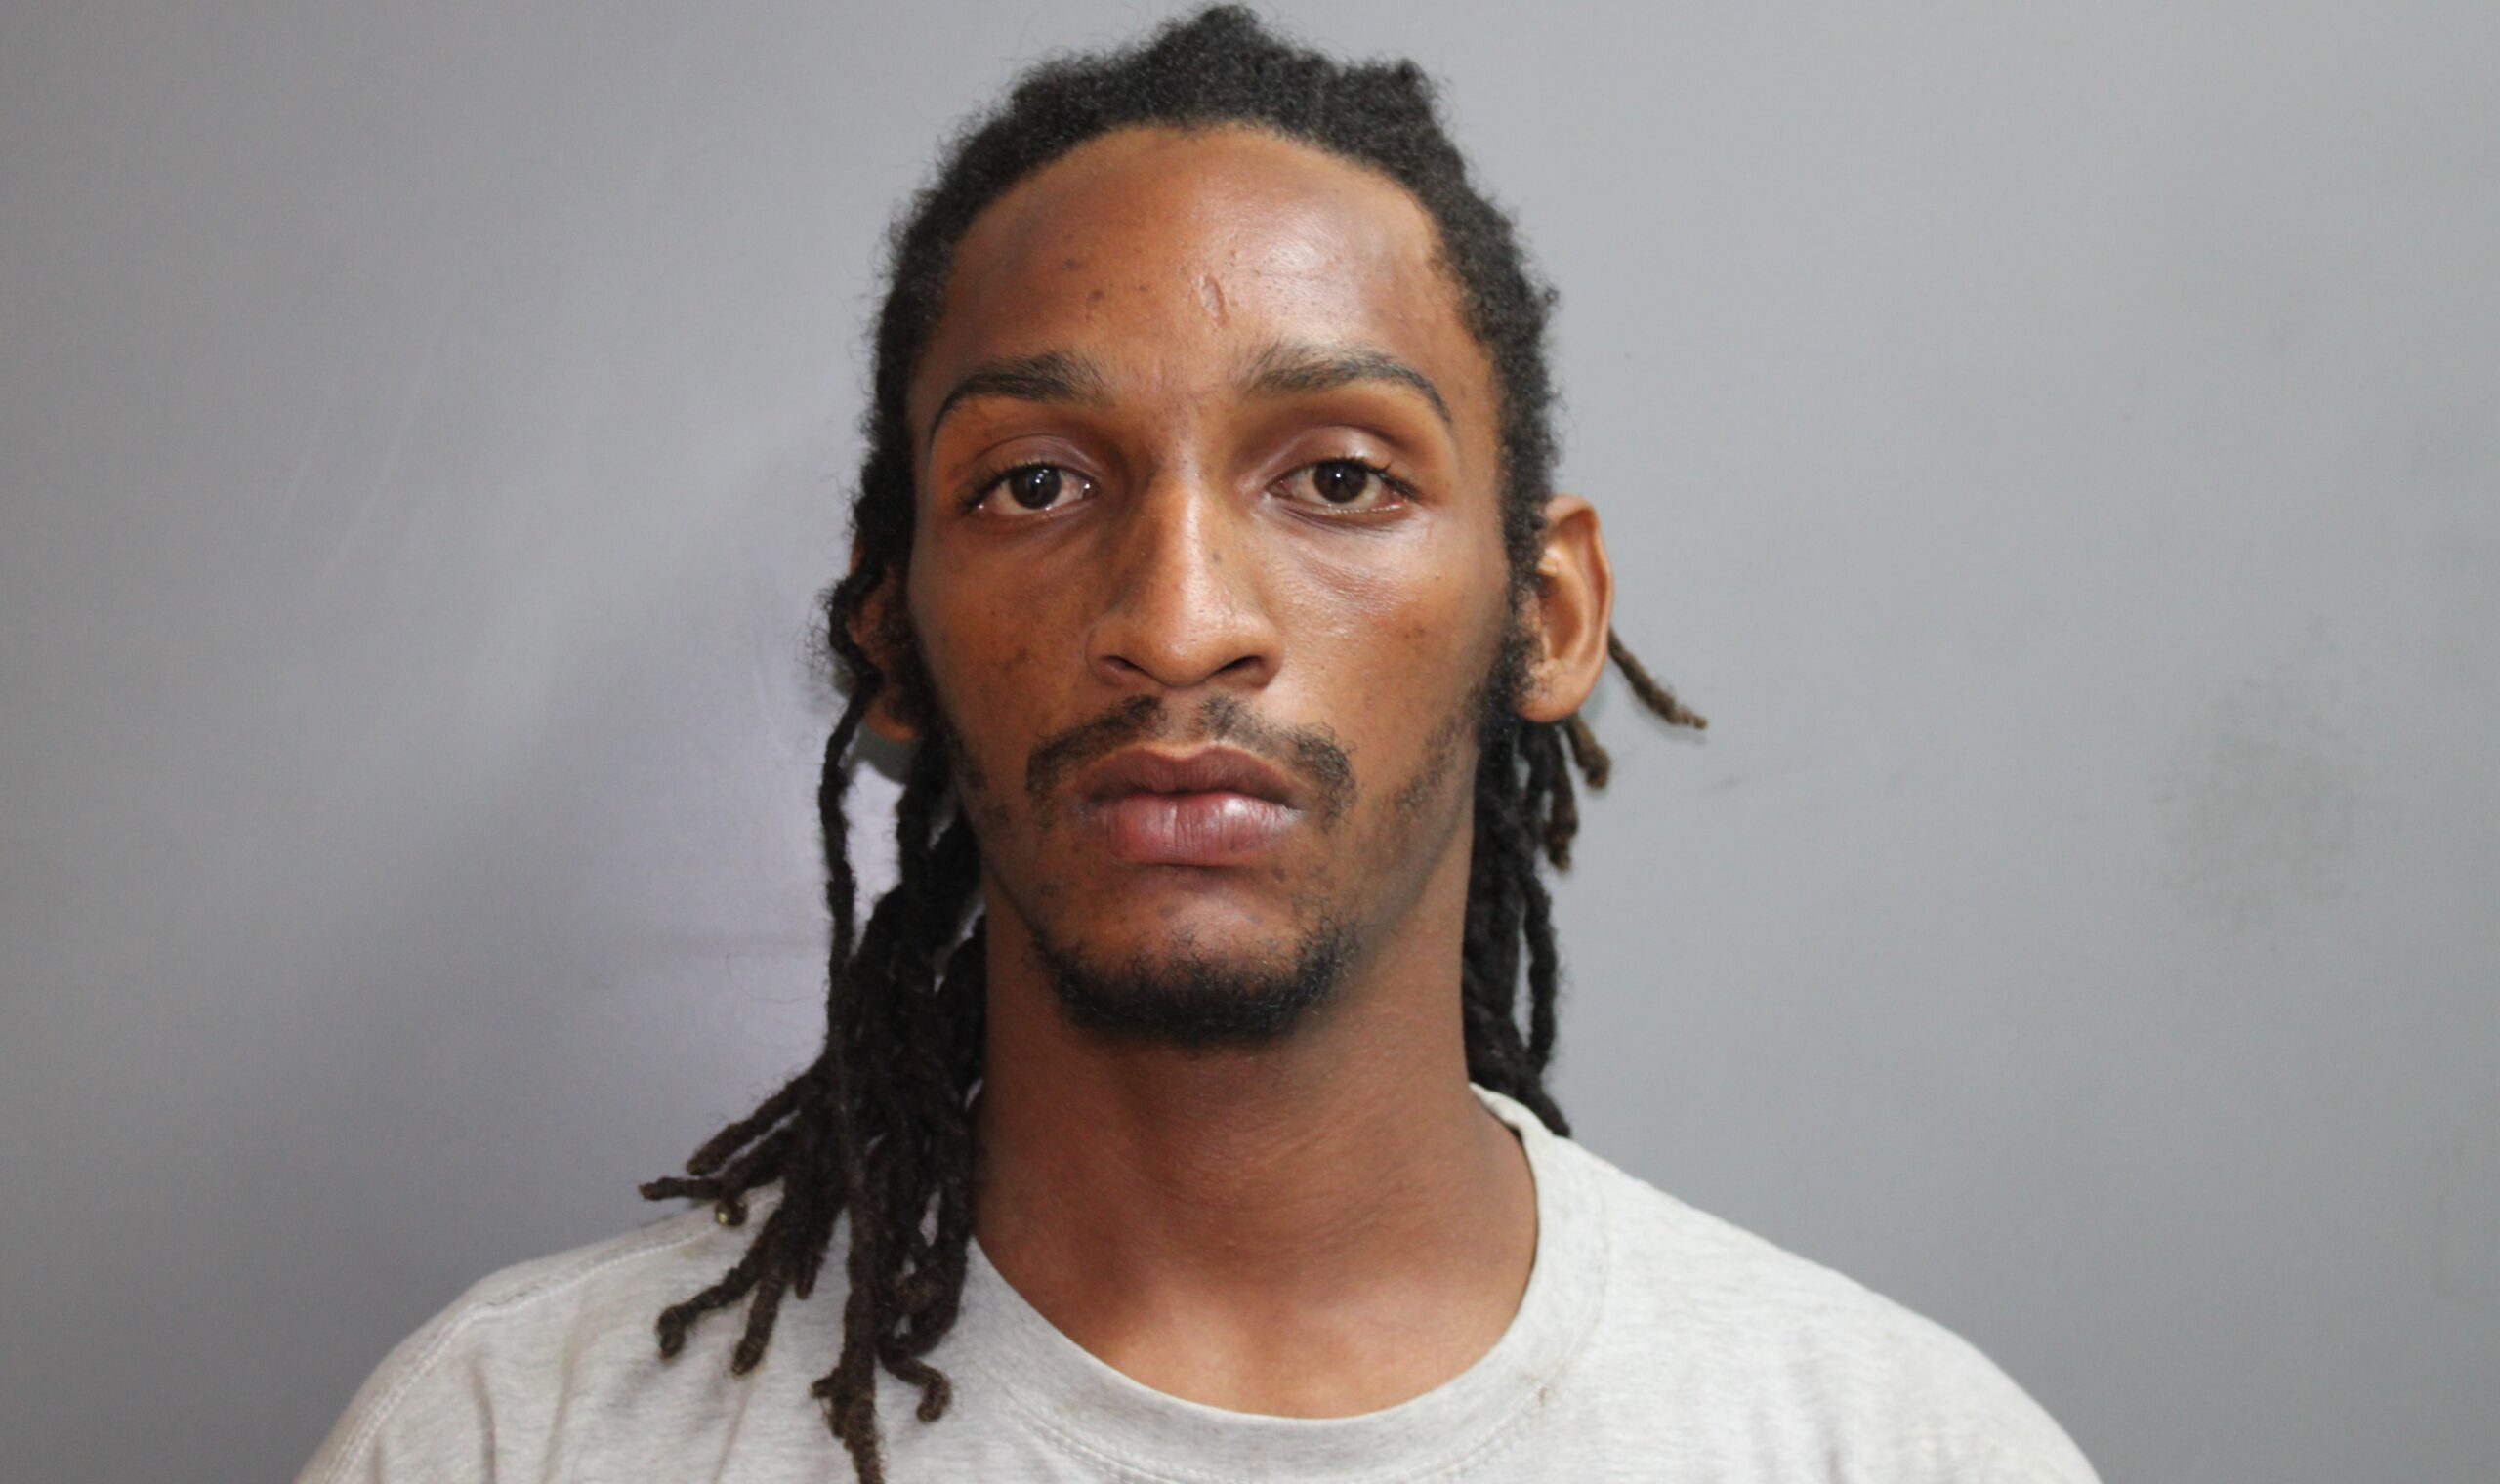 St. Croix Man With 'Large Amount Of Marijuana' In Vehicle Tries To Run Away From Traffic Stop On Foot